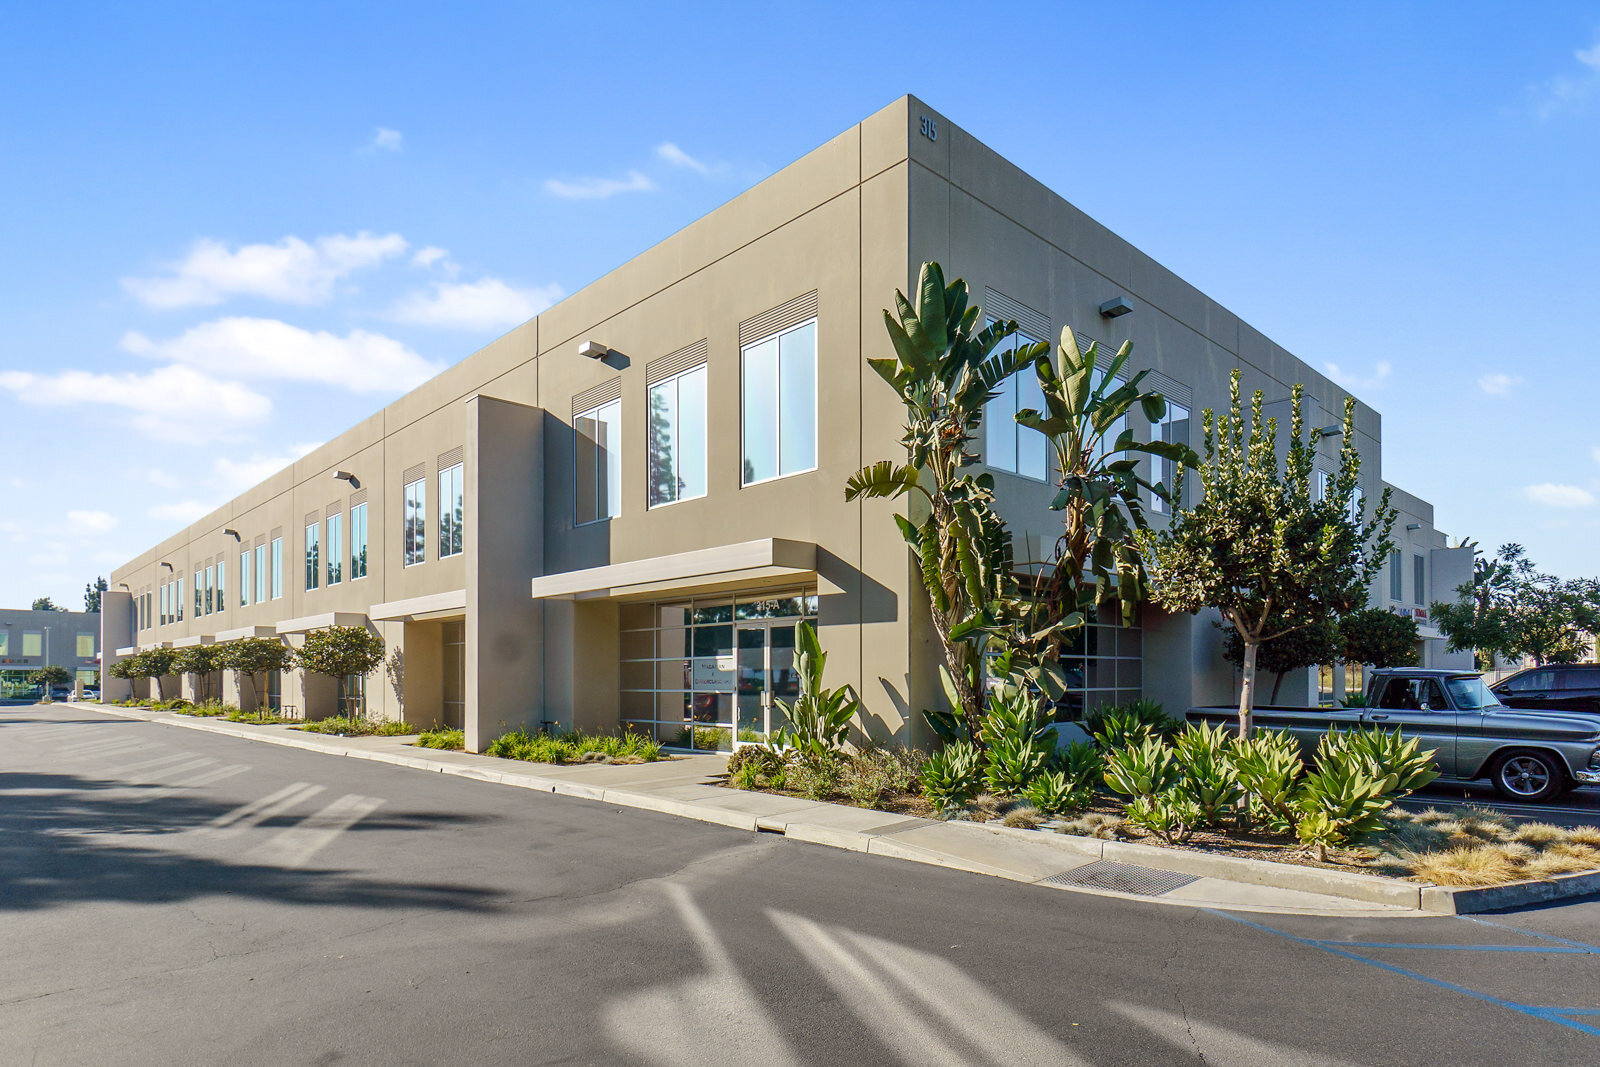 Orange County Commercial Real Estate for Lease - Orange County Real Estate Broker.jpg